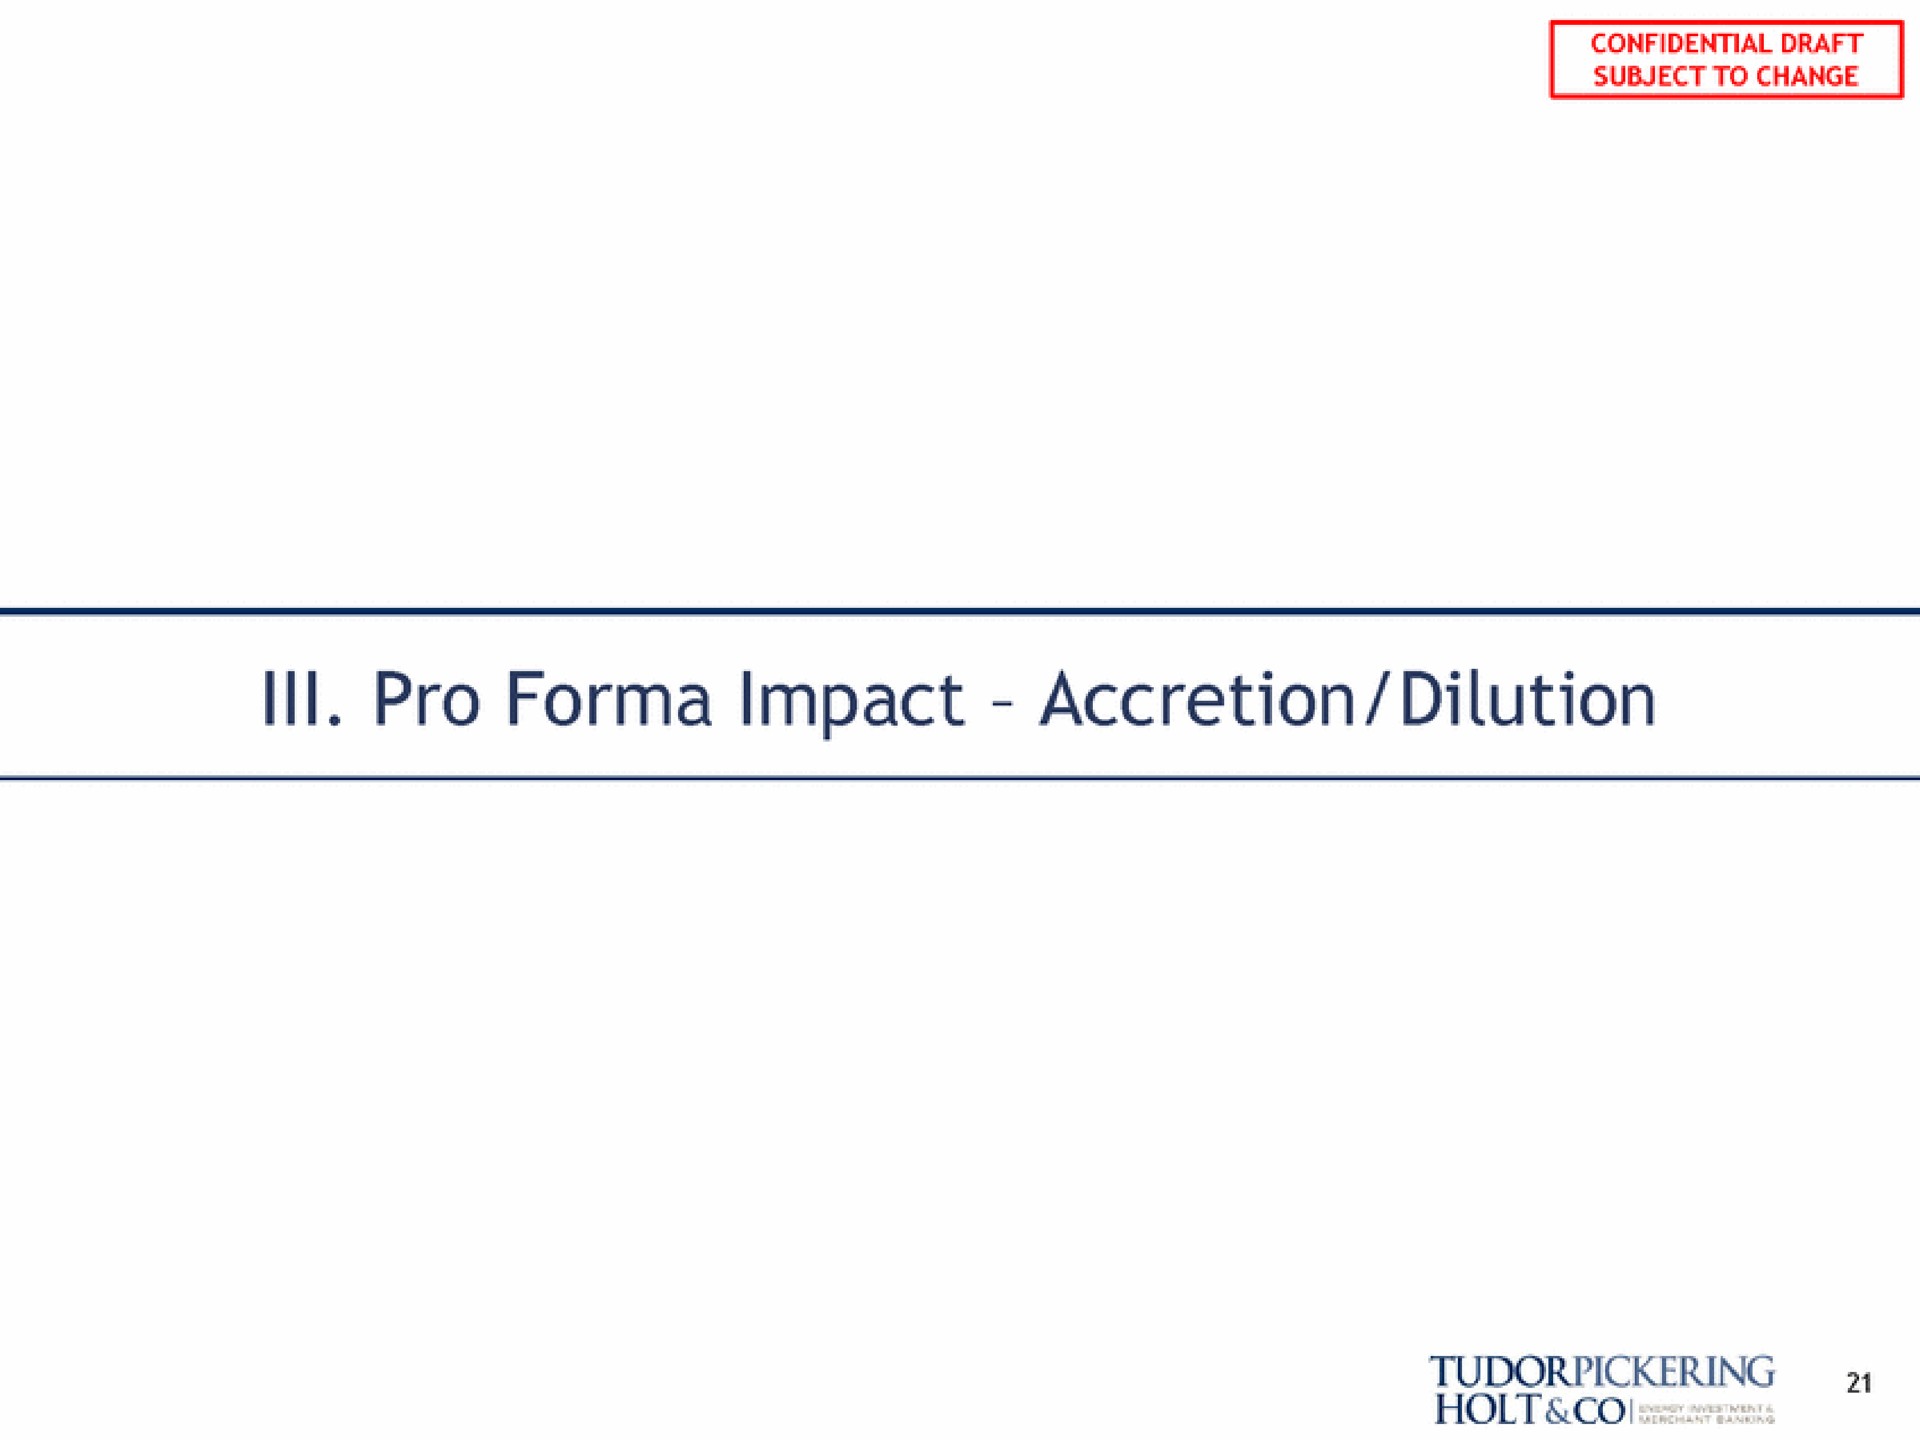 subject to change pro impact accretion dilution | Tudor, Pickering, Holt & Co